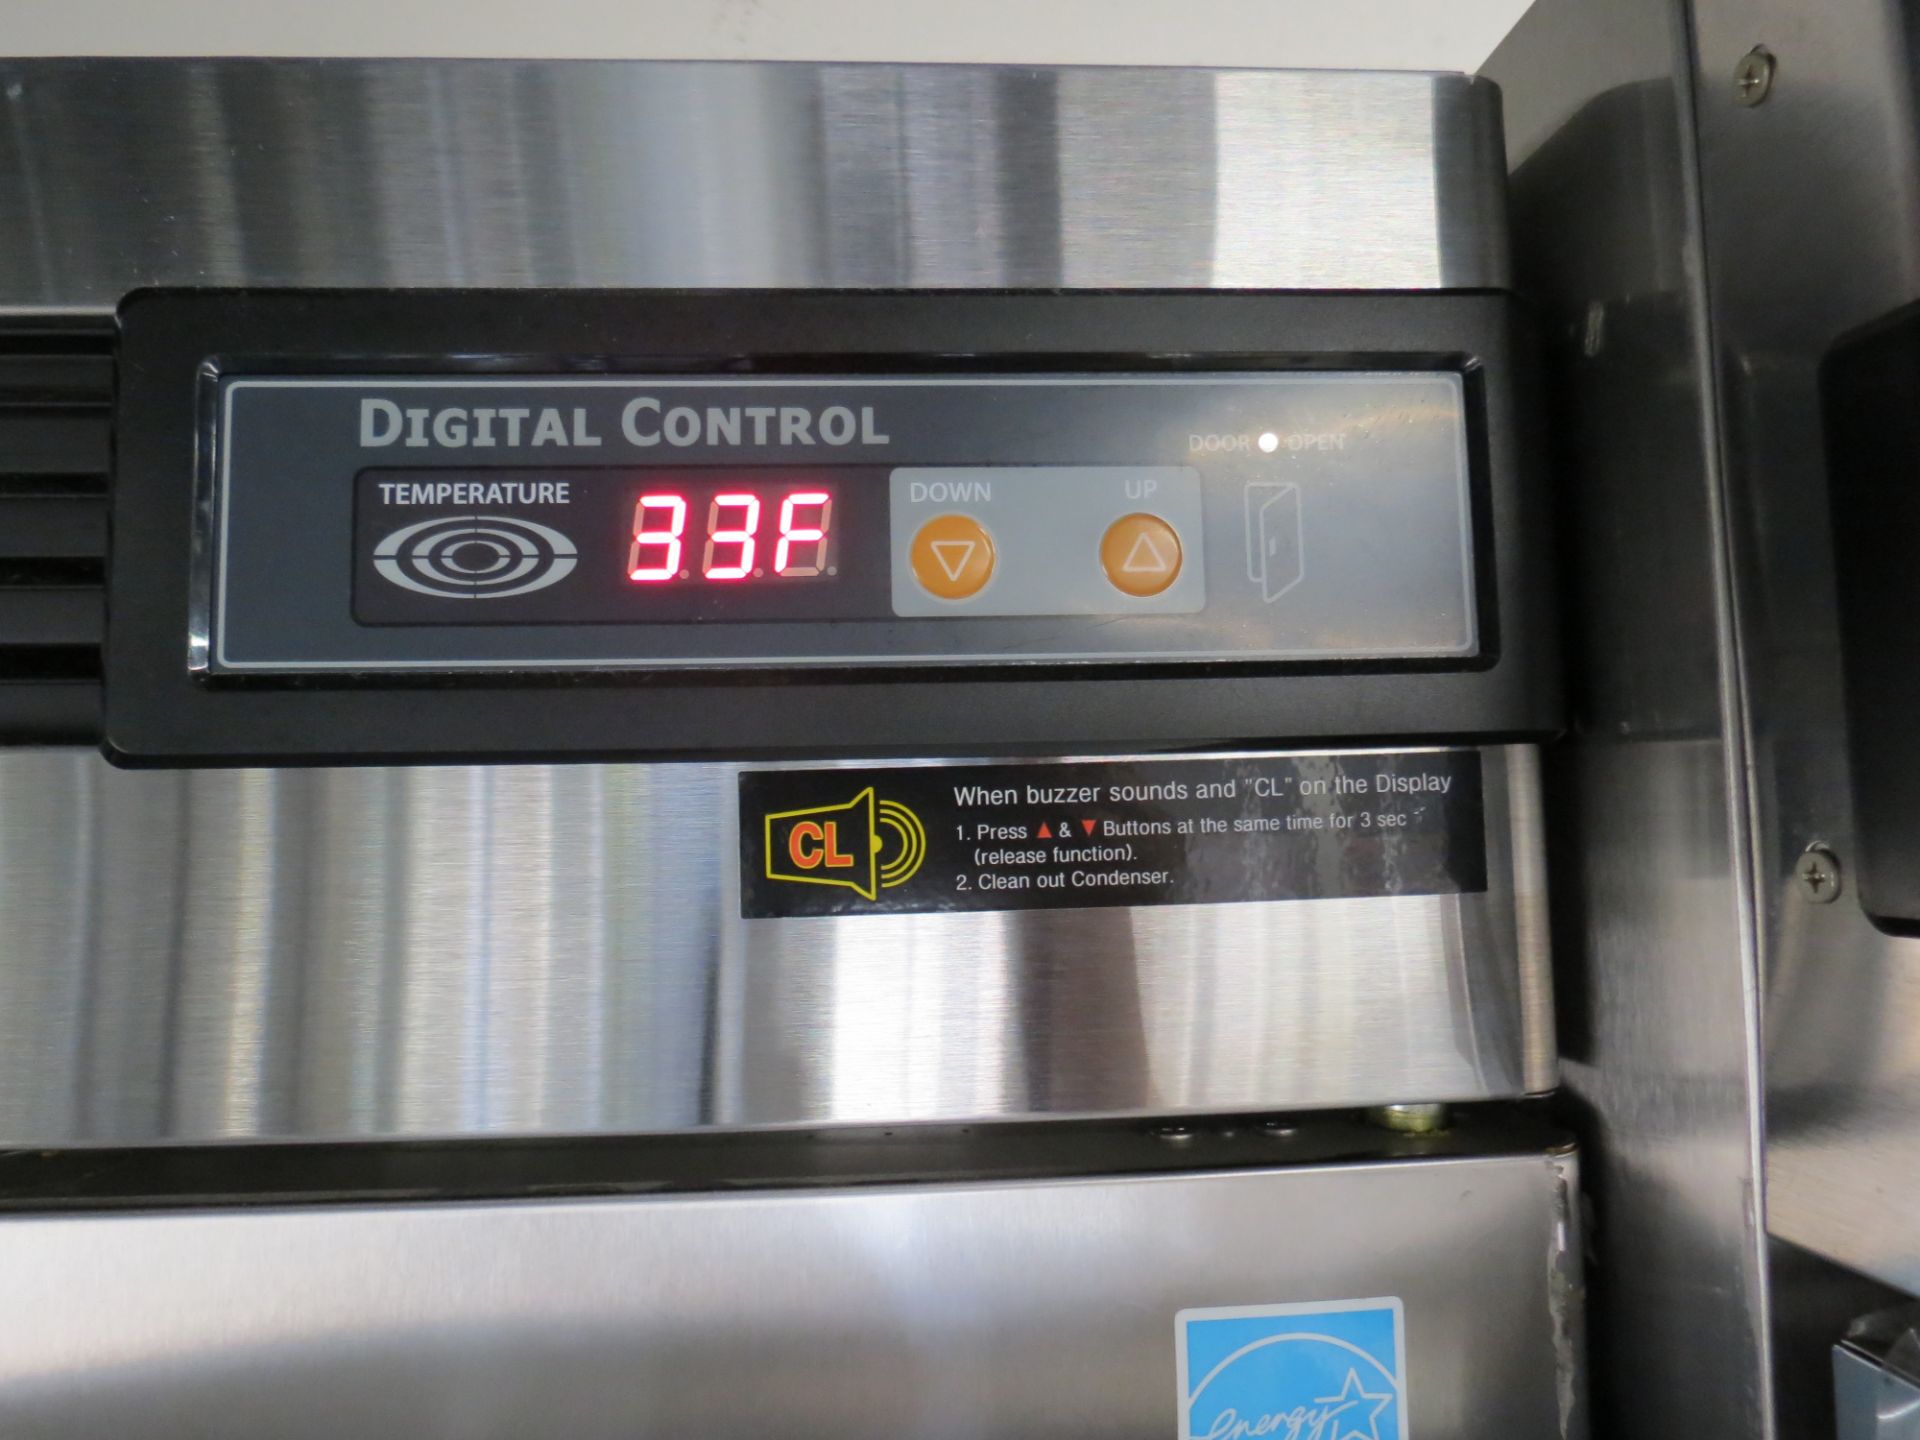 Blue Air Stainless Steel Model BSR49 Commercial Refrigerator with Digital Control - Image 2 of 5